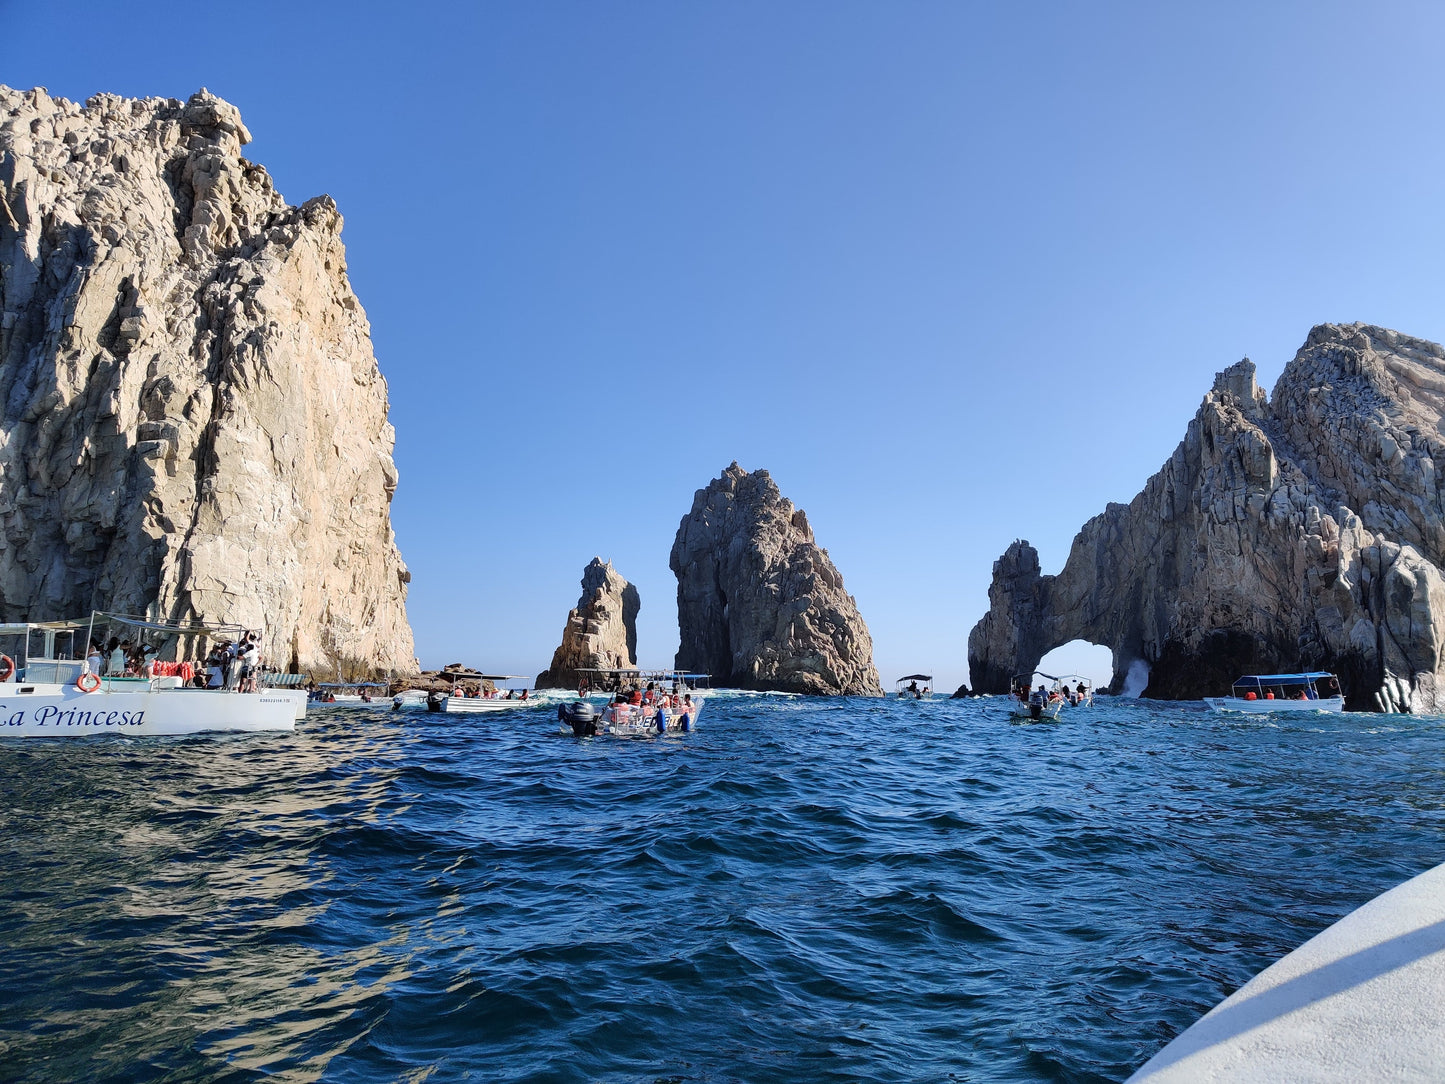 Boats on the ocean in Los Cabos Mexico during a small group trip excursion.